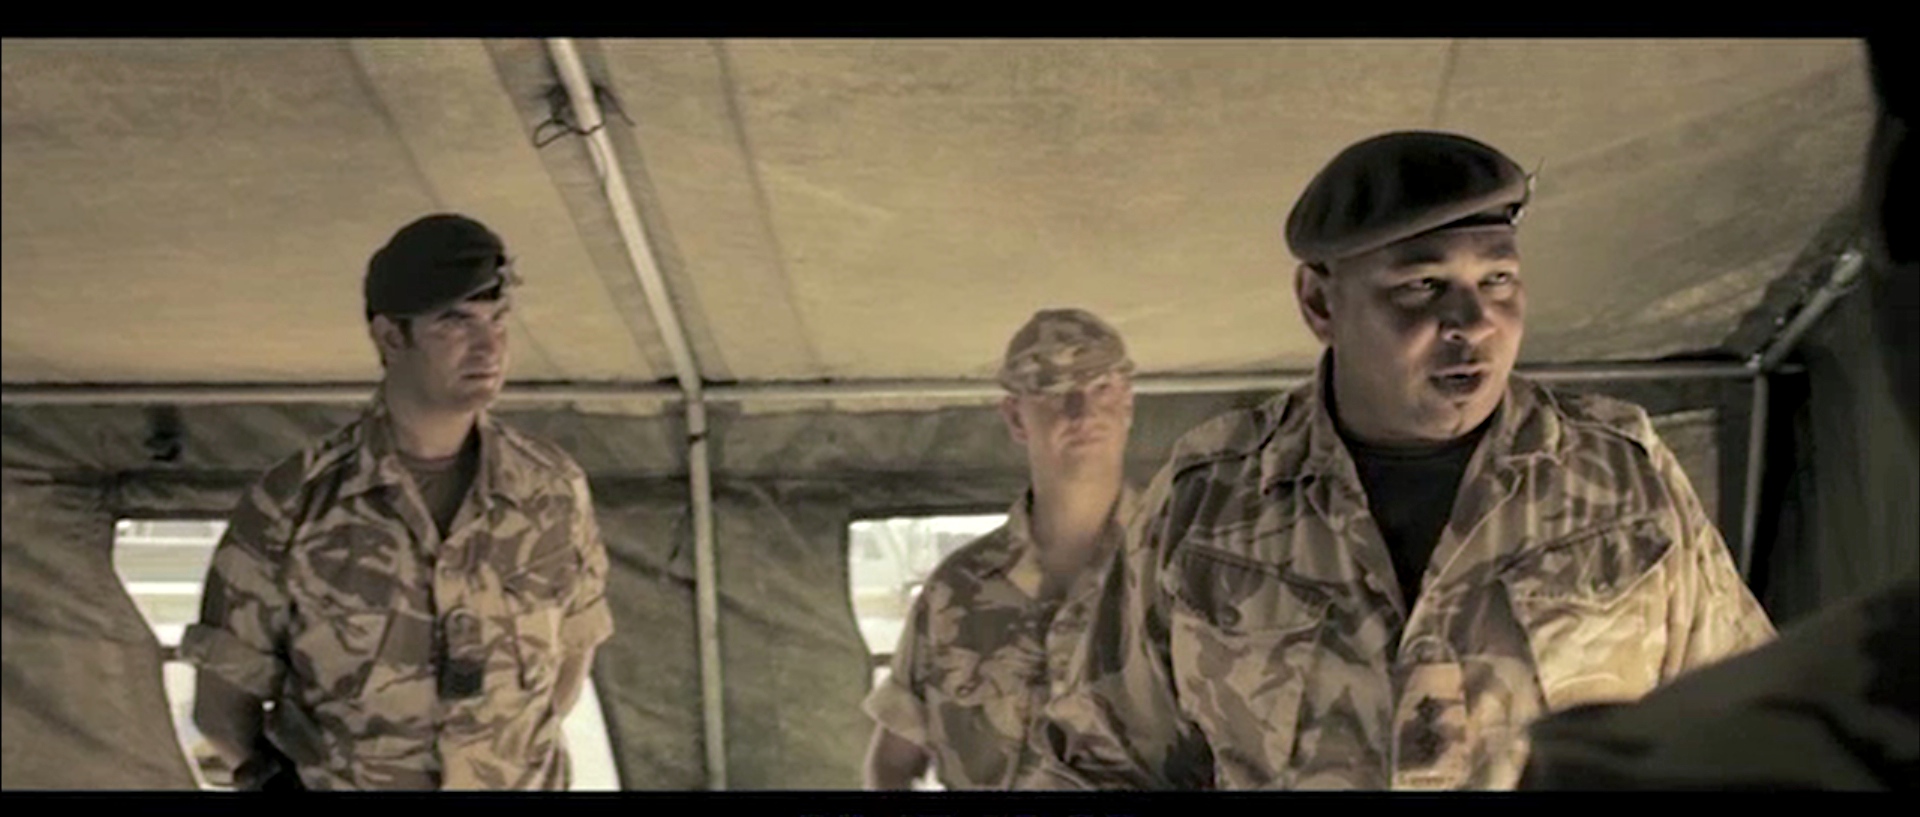 'Addressing the troops' Robby Haynes & Mark Bannerman in 'A Landscape Of Lies'